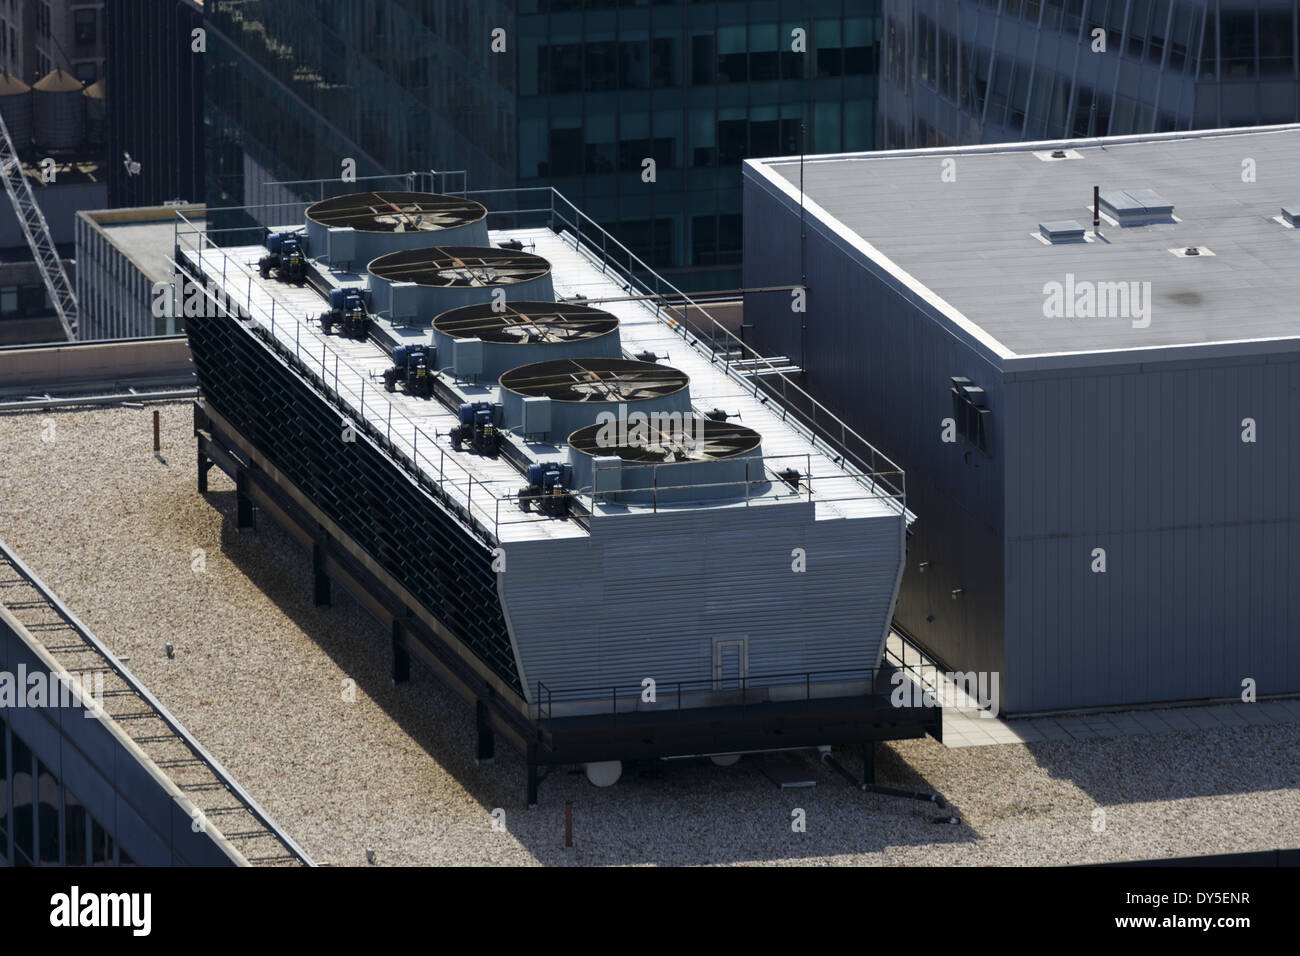 Industrial sized air conditioning and ventilation units on top of 1166 Avenue of the Americas International Paper Building New York, USA Stock Photo